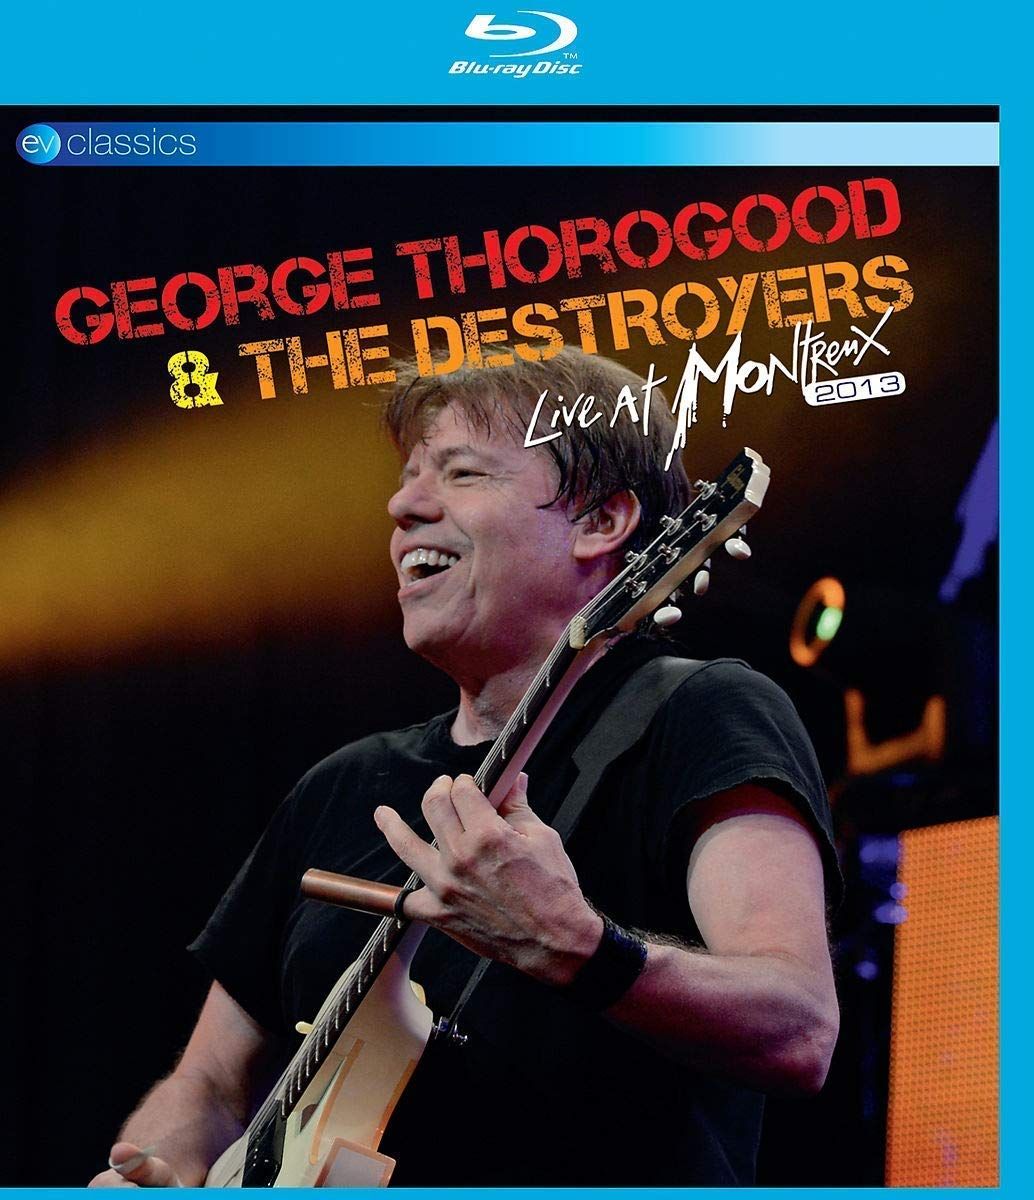 GEORGE THOROGOOD & DESTROYERS / LIVE AT MONTREUX 2013 (BLU-RAY)